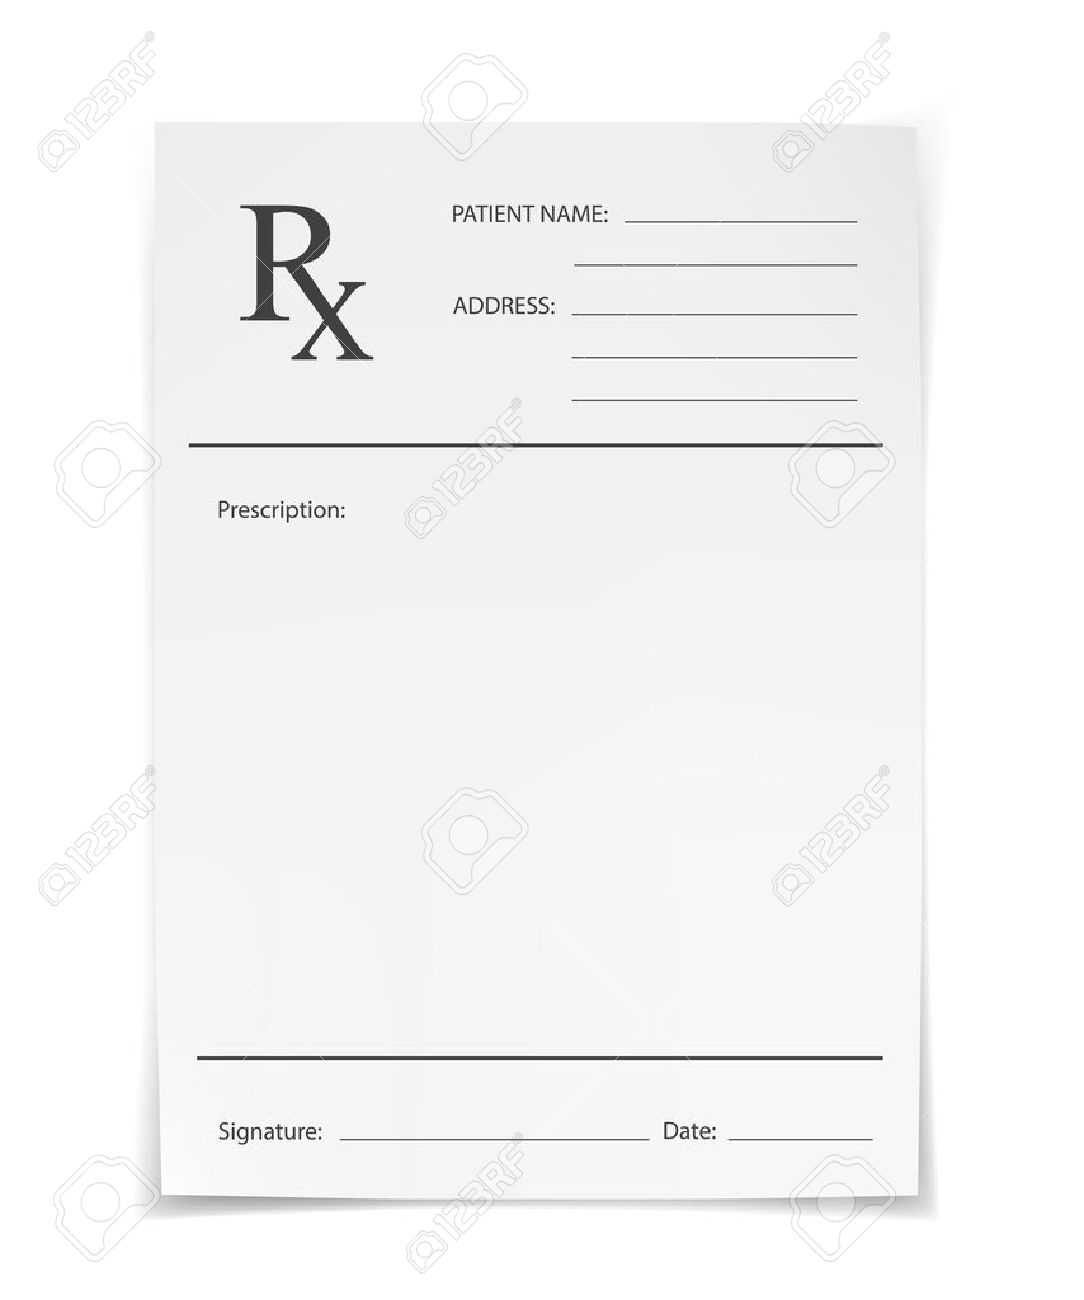 Blank Rx Prescription Form Isolated On White Background Intended For Blank Prescription Pad Template